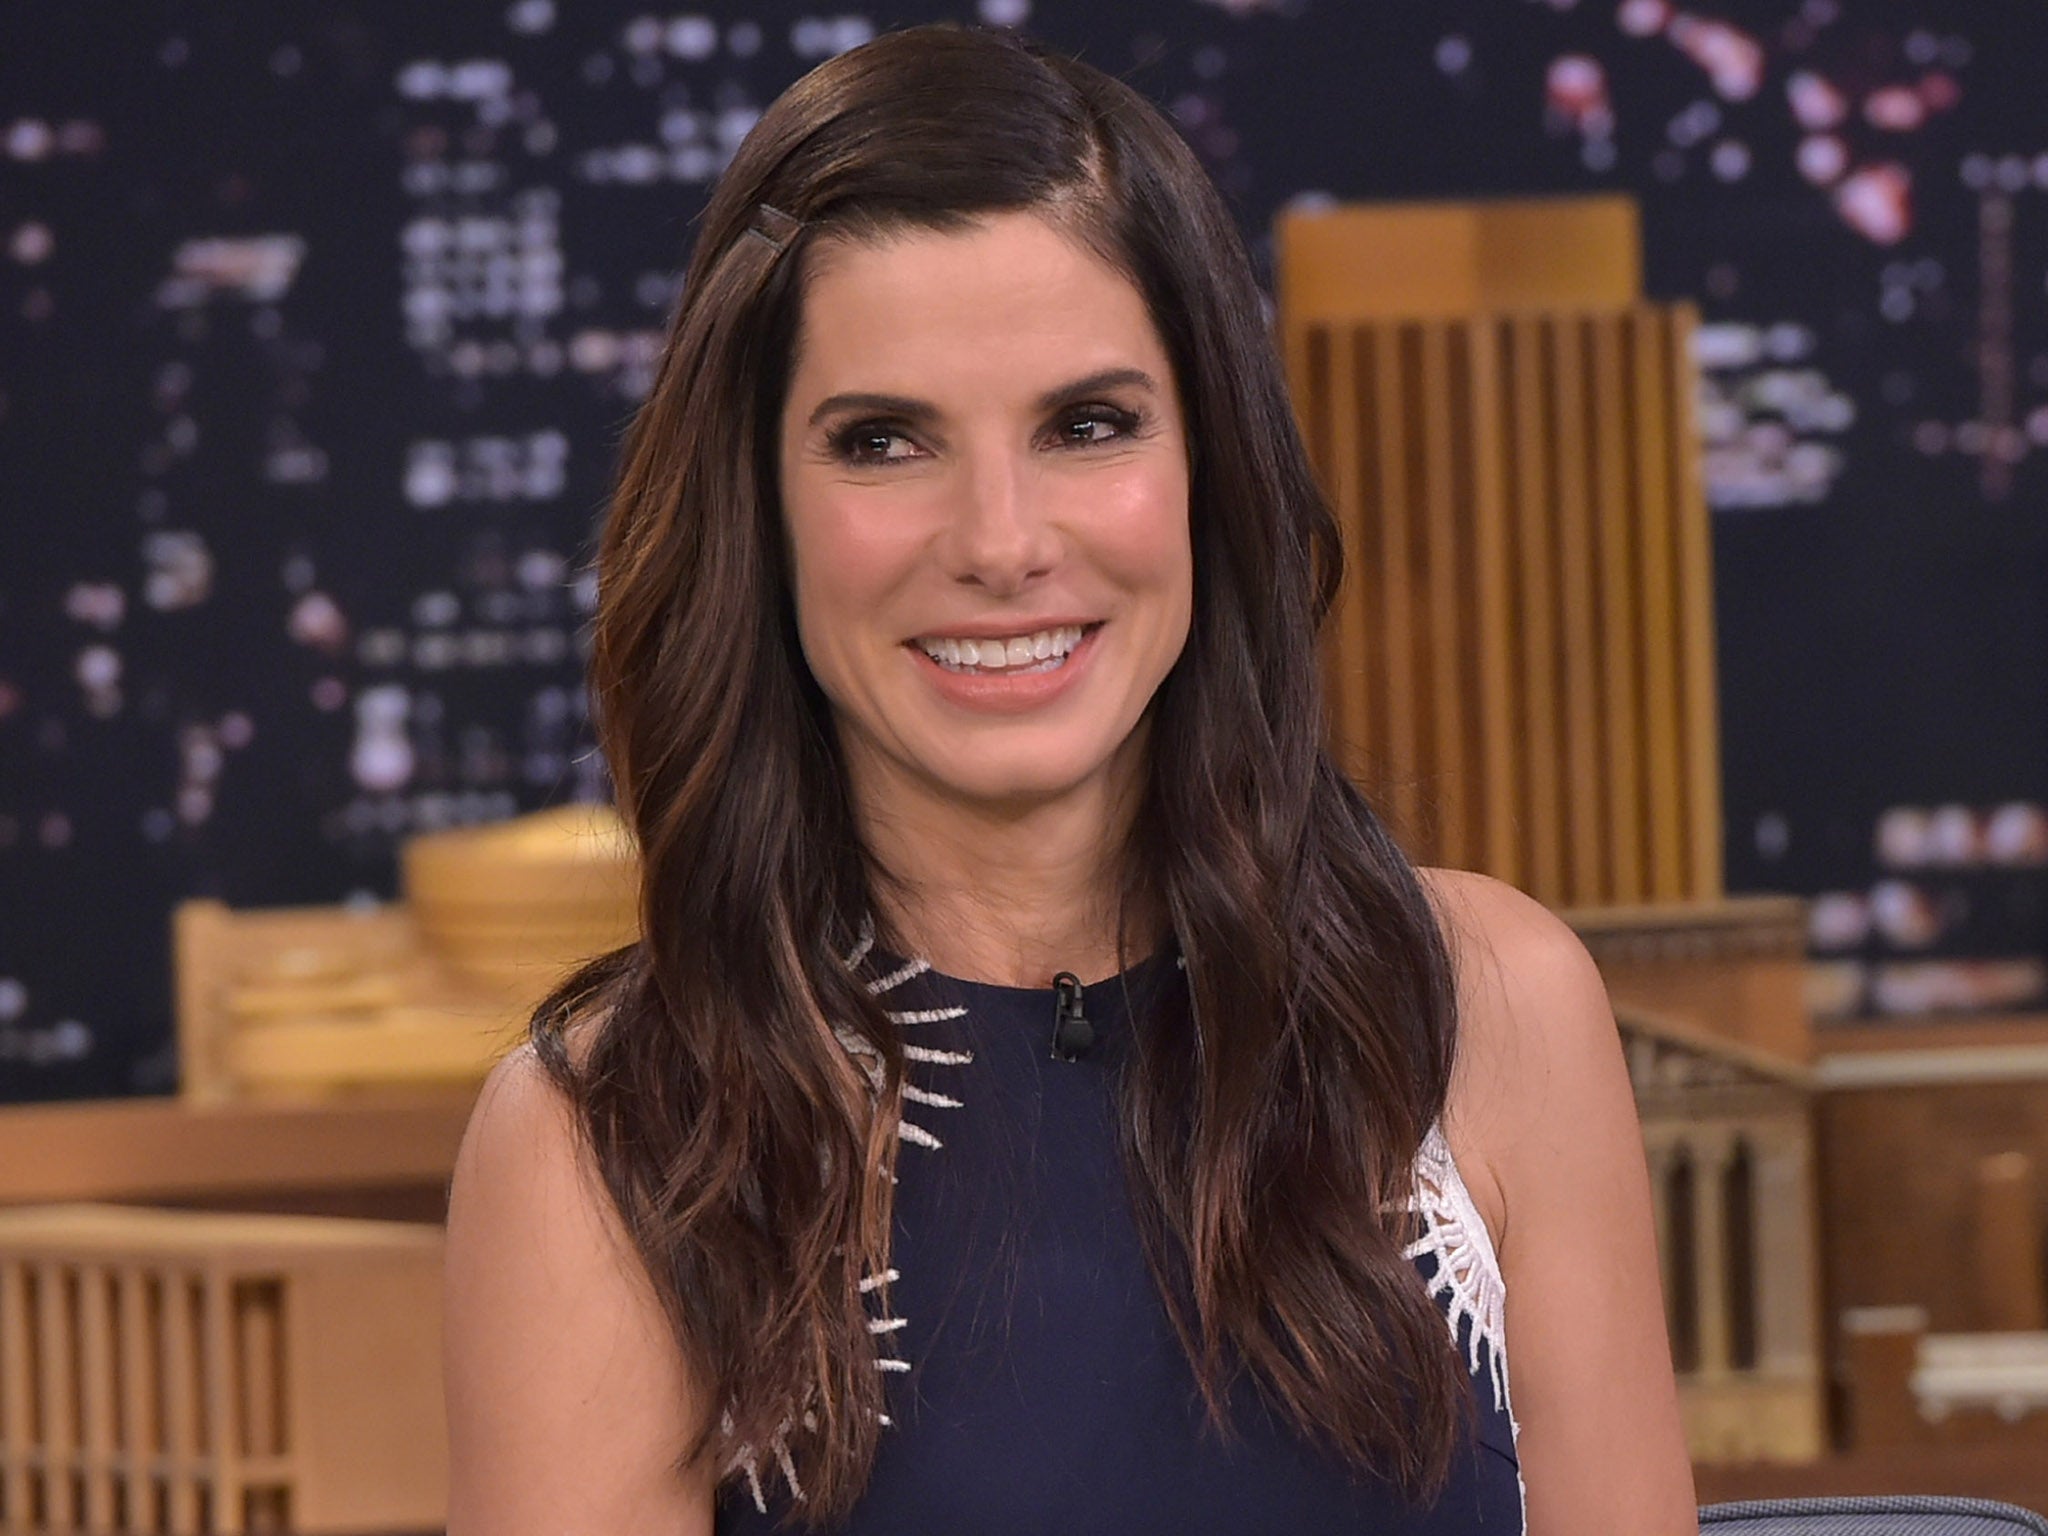 Sandra Bullock founded Fortis Films in the mid 1990s to find good roles for herself and gain creative control